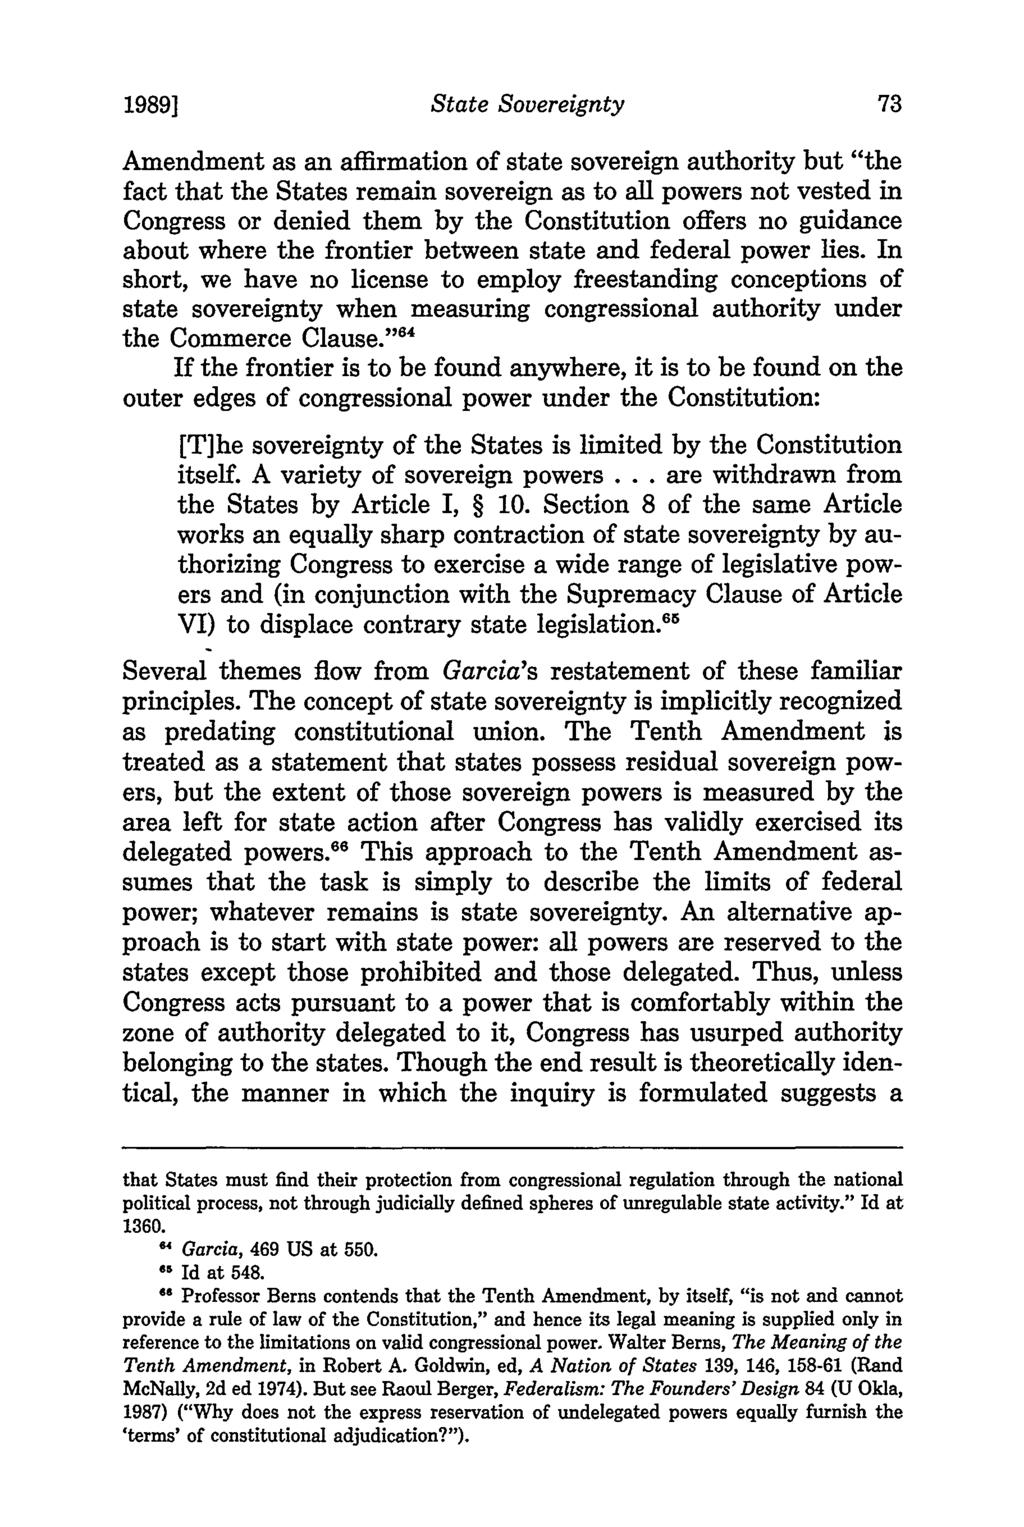 1989] State Sovereignty Amendment as an affirmation of state sovereign authority but "the fact that the States remain sovereign as to all powers not vested in Congress or denied them by the